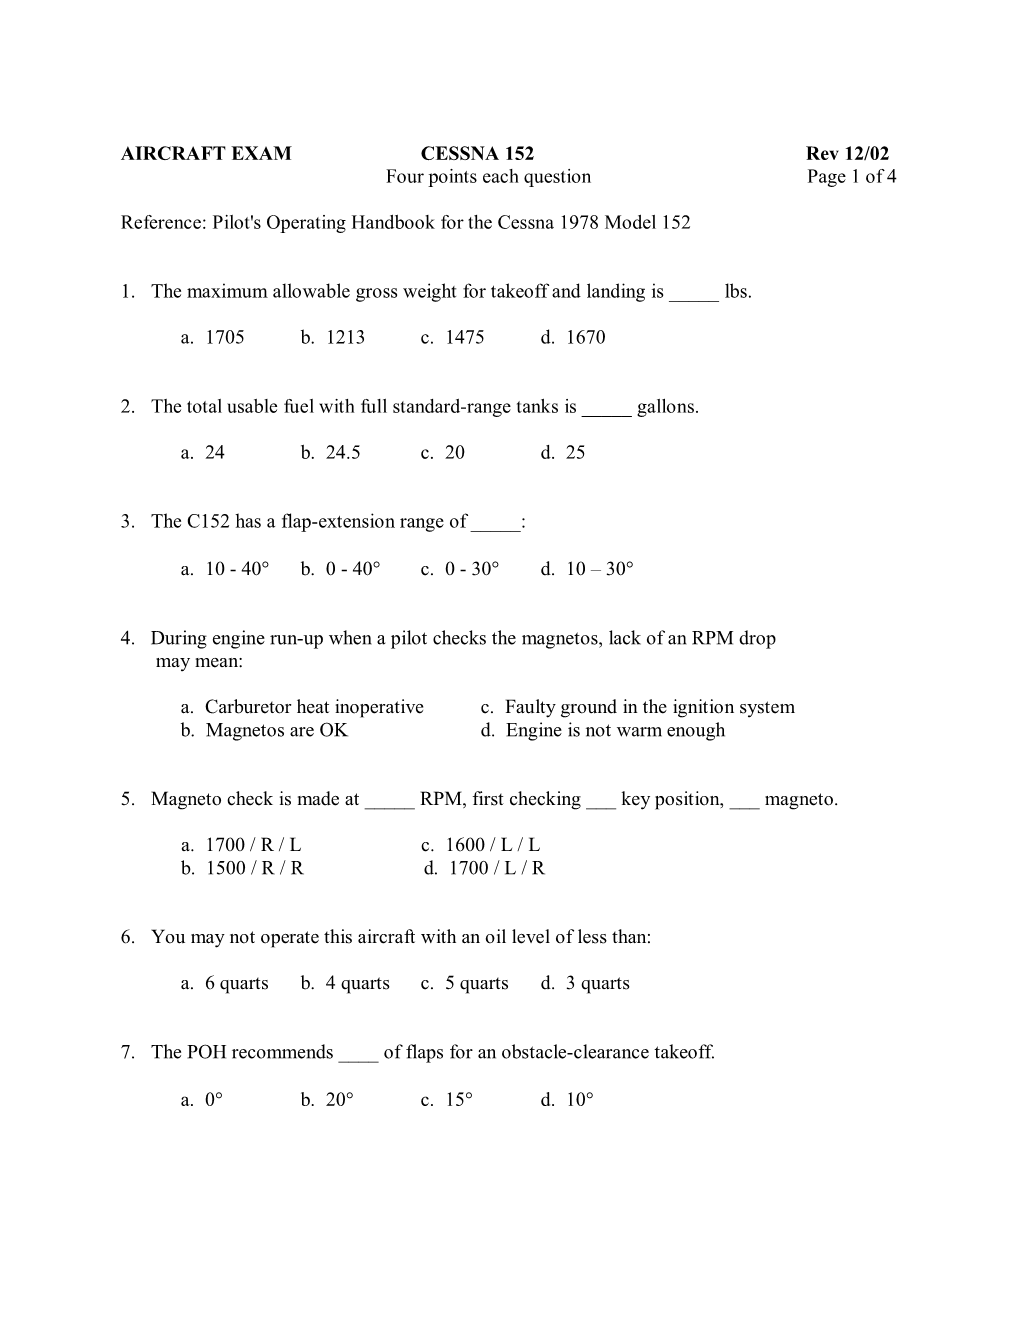 AIRCRAFT EXAM CESSNA 152 Rev 12/02 Four Points Each Question Page 1 of 4